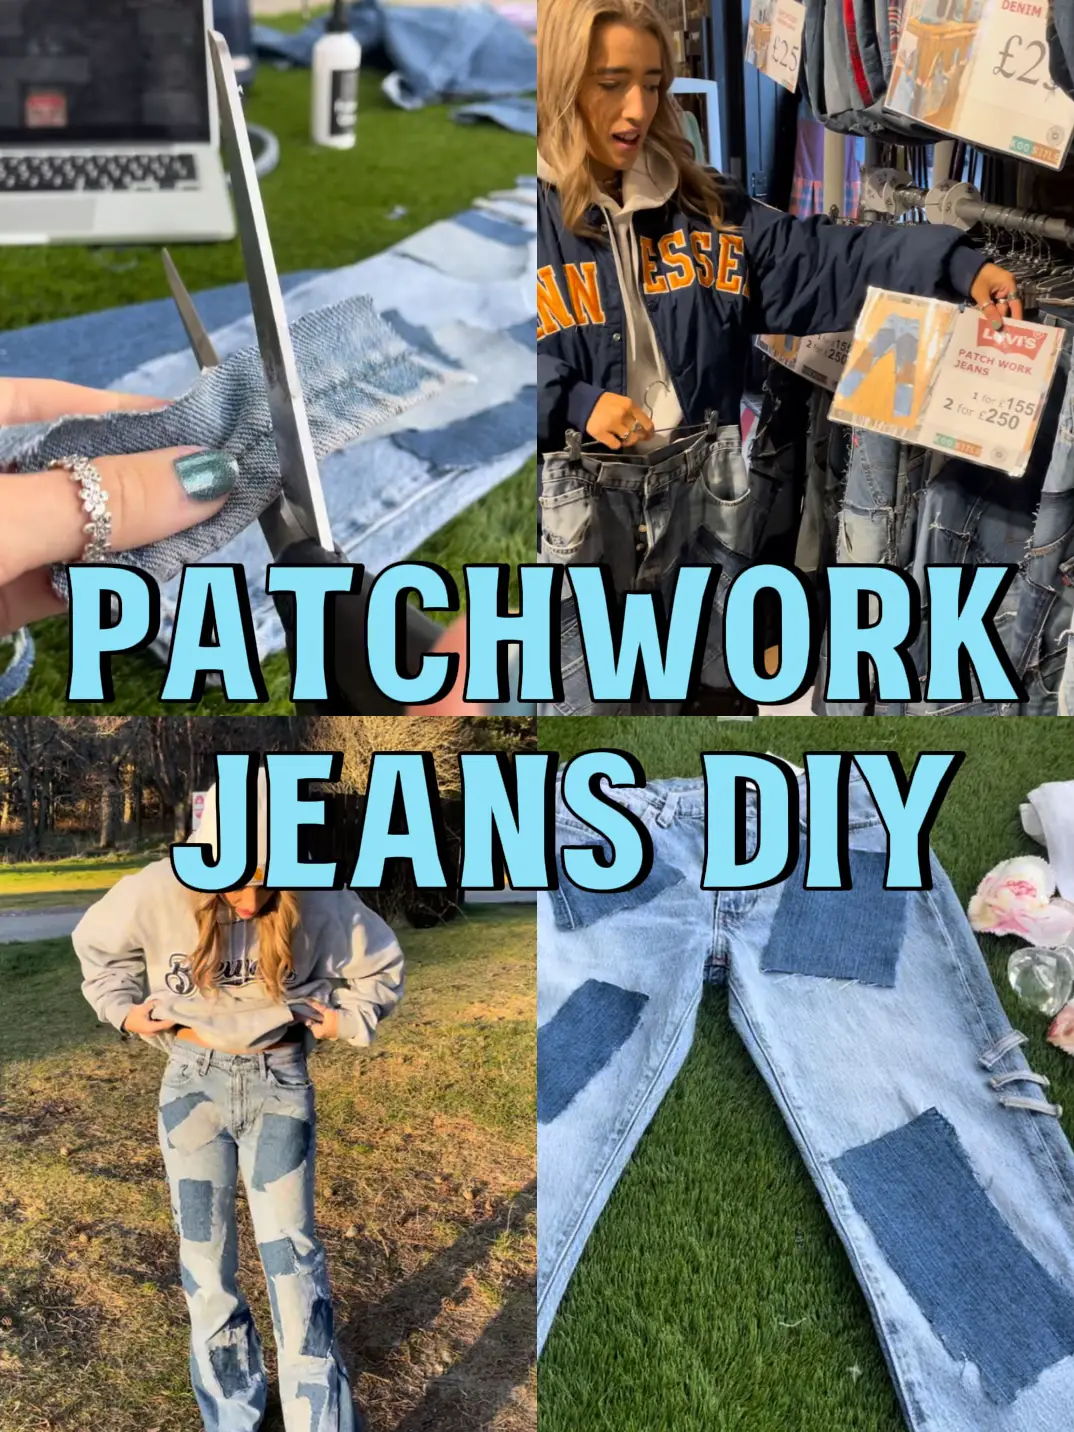 DIY Patched Jeans